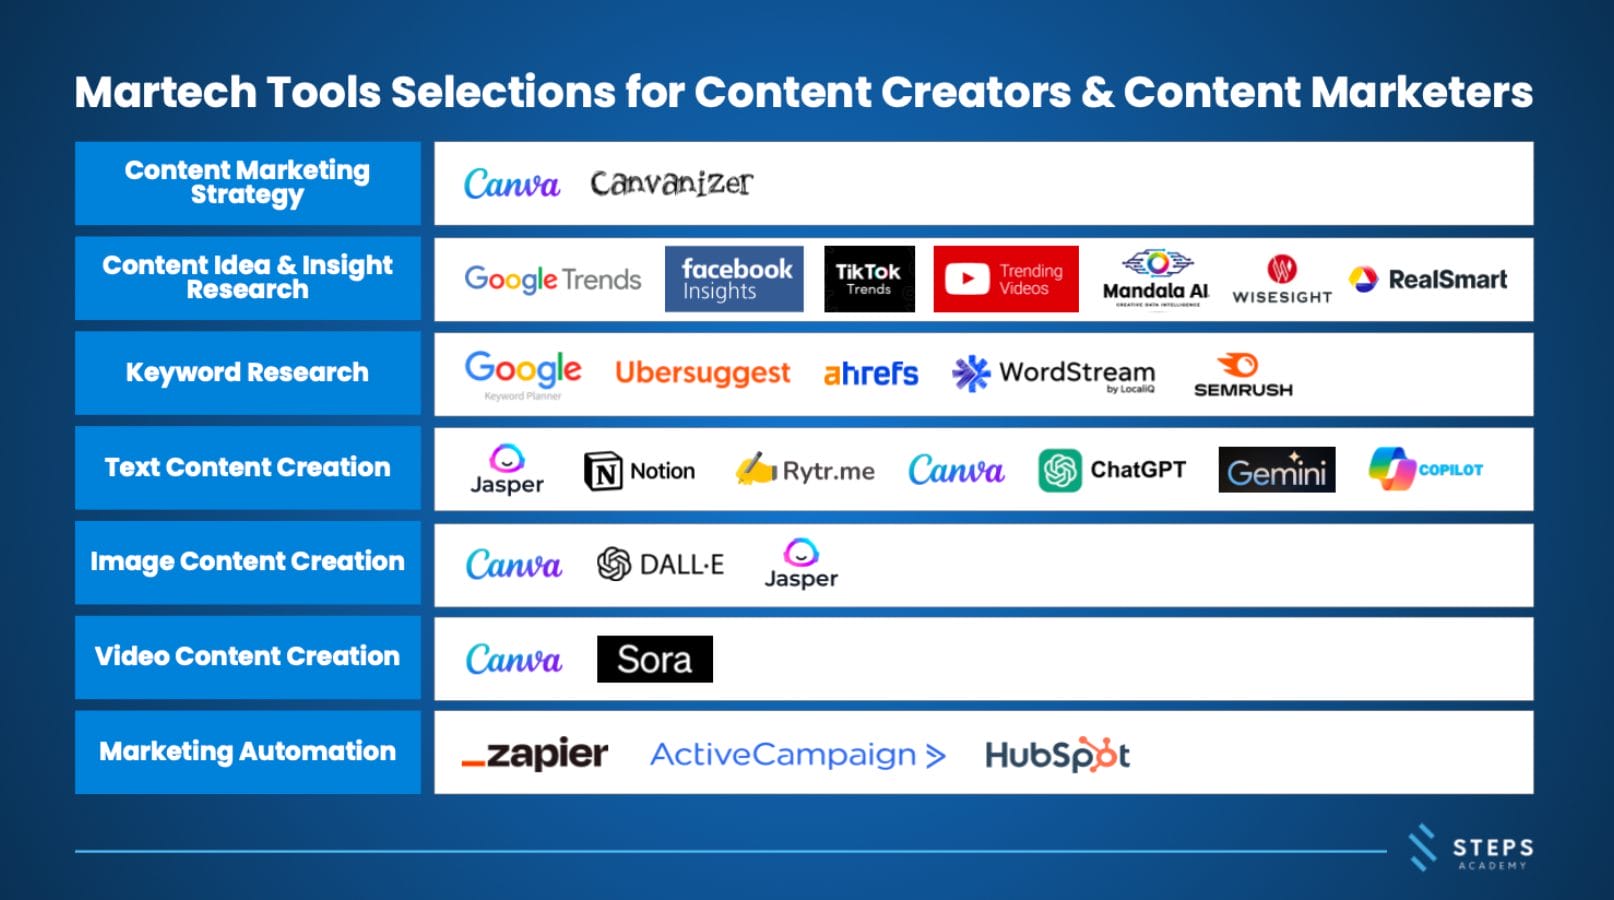 Martech Tools for Content Creators and Marketers